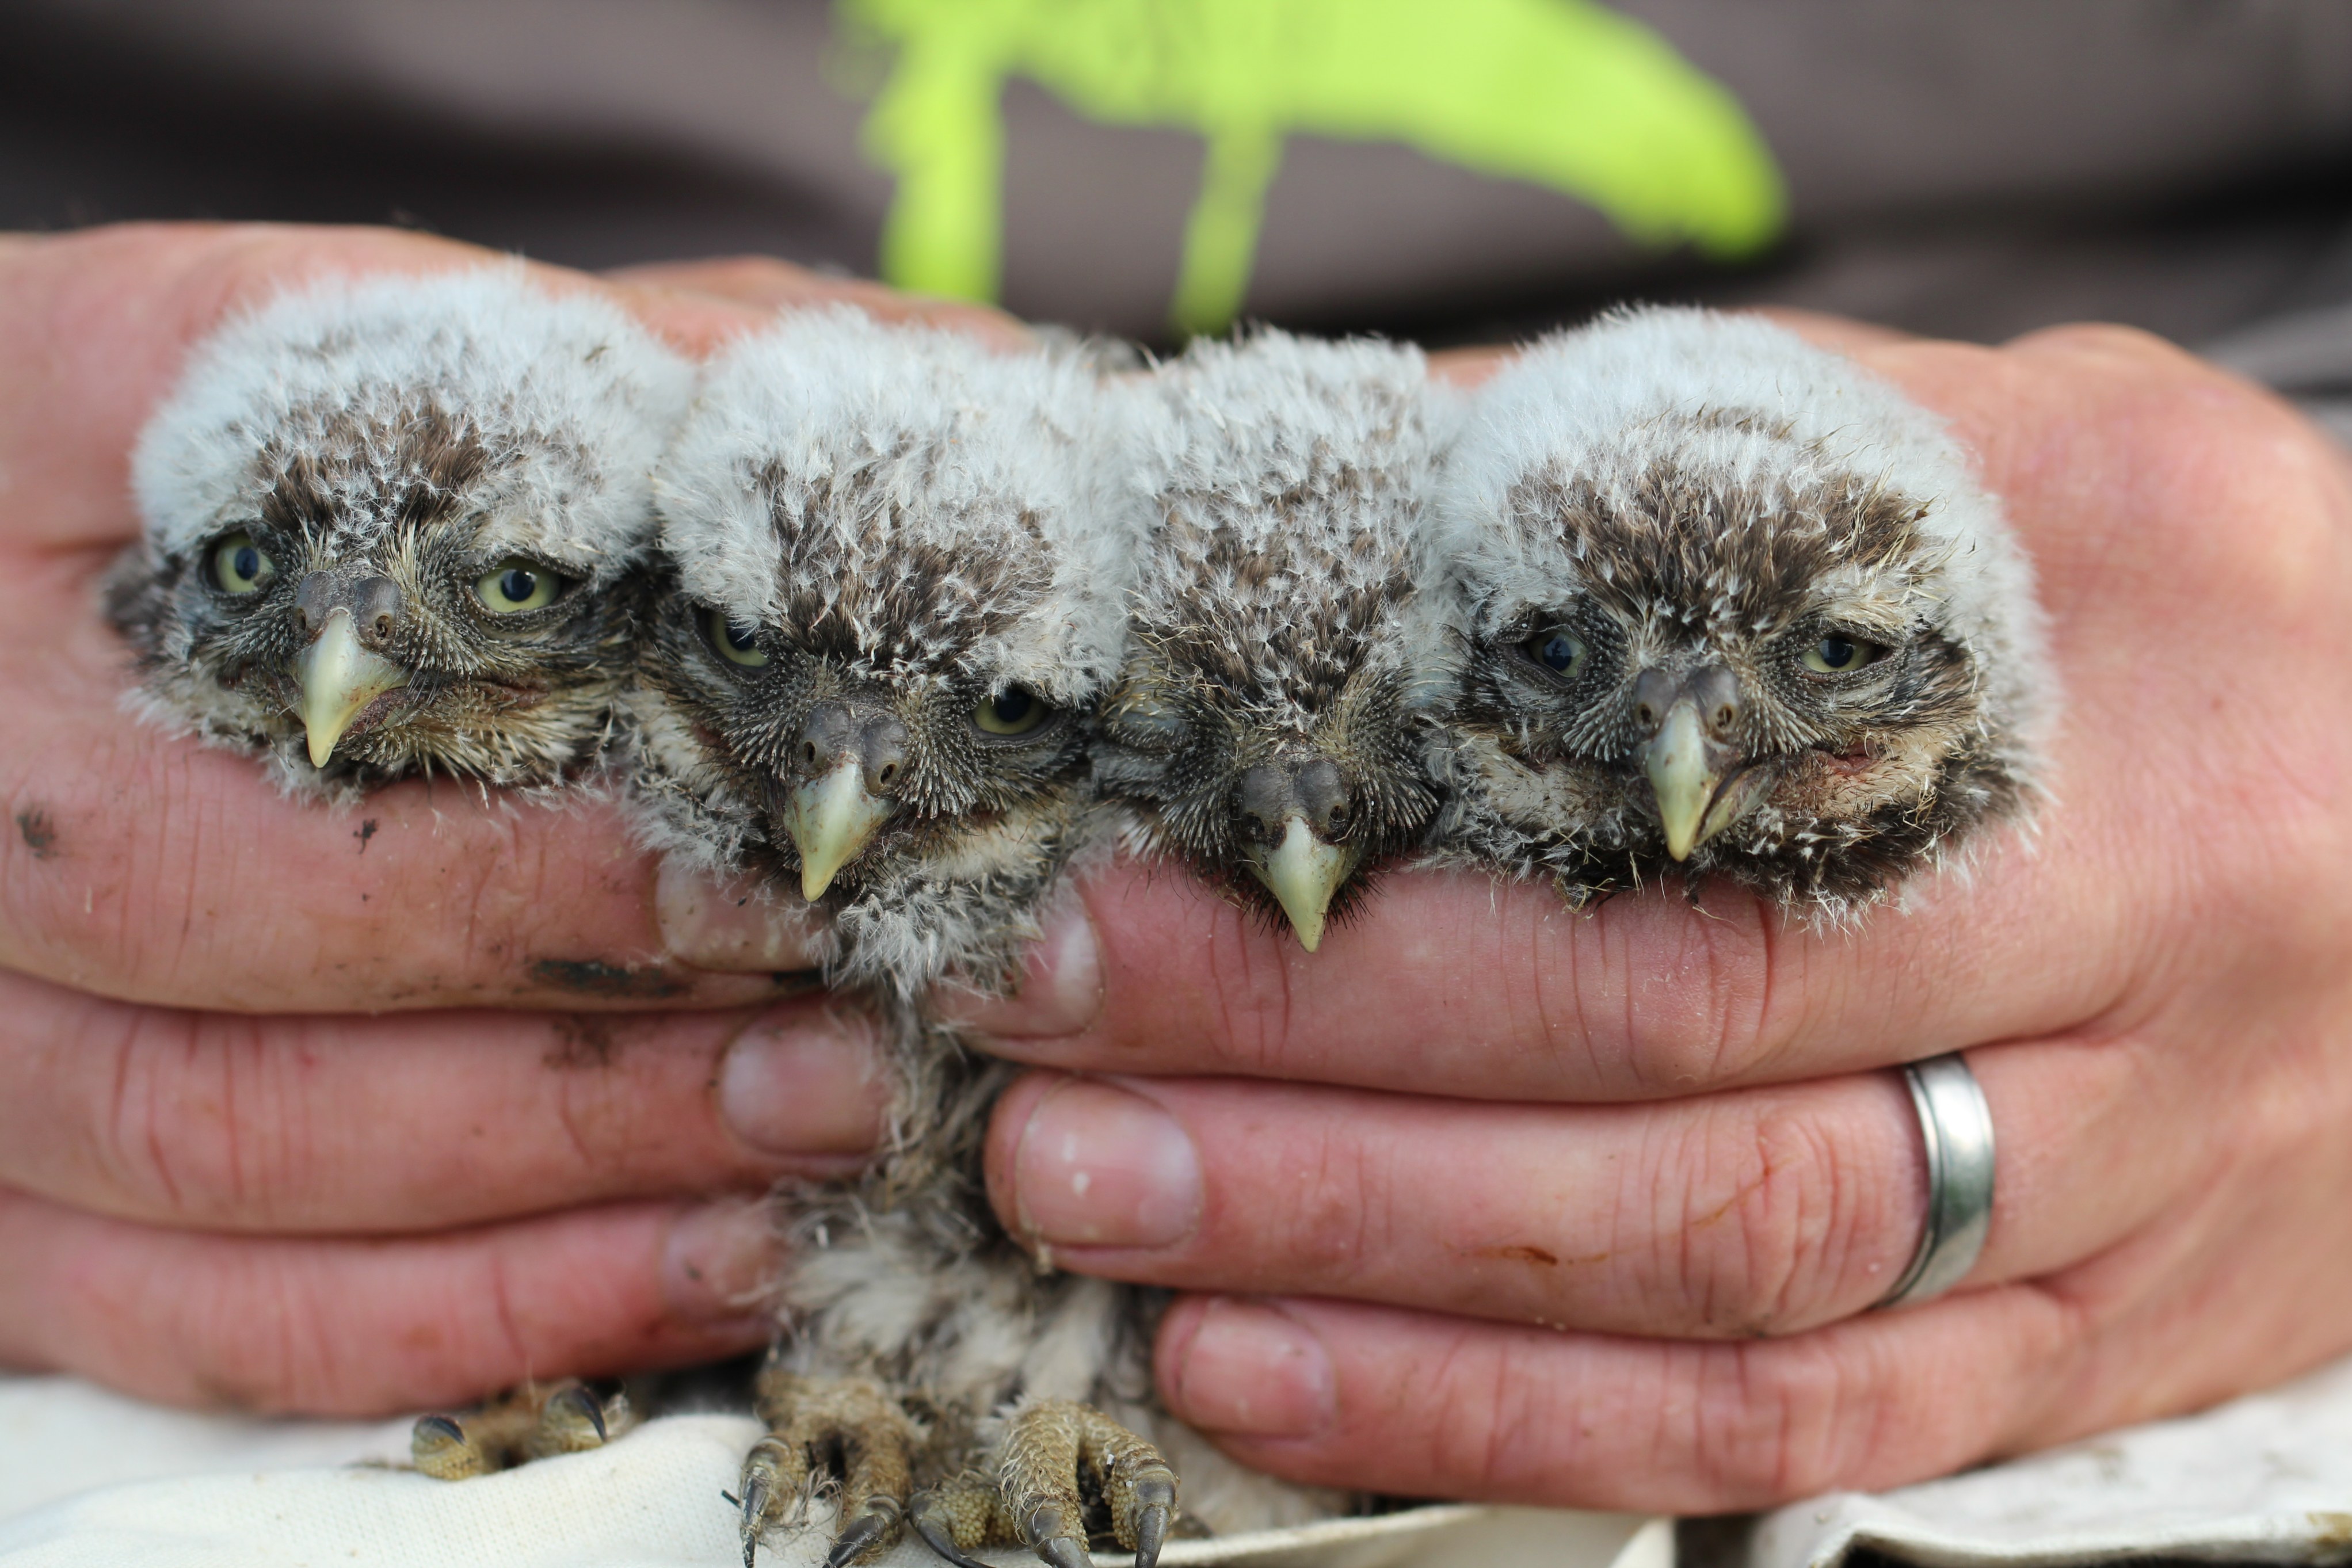 A pair of hands holds 4 baby owls